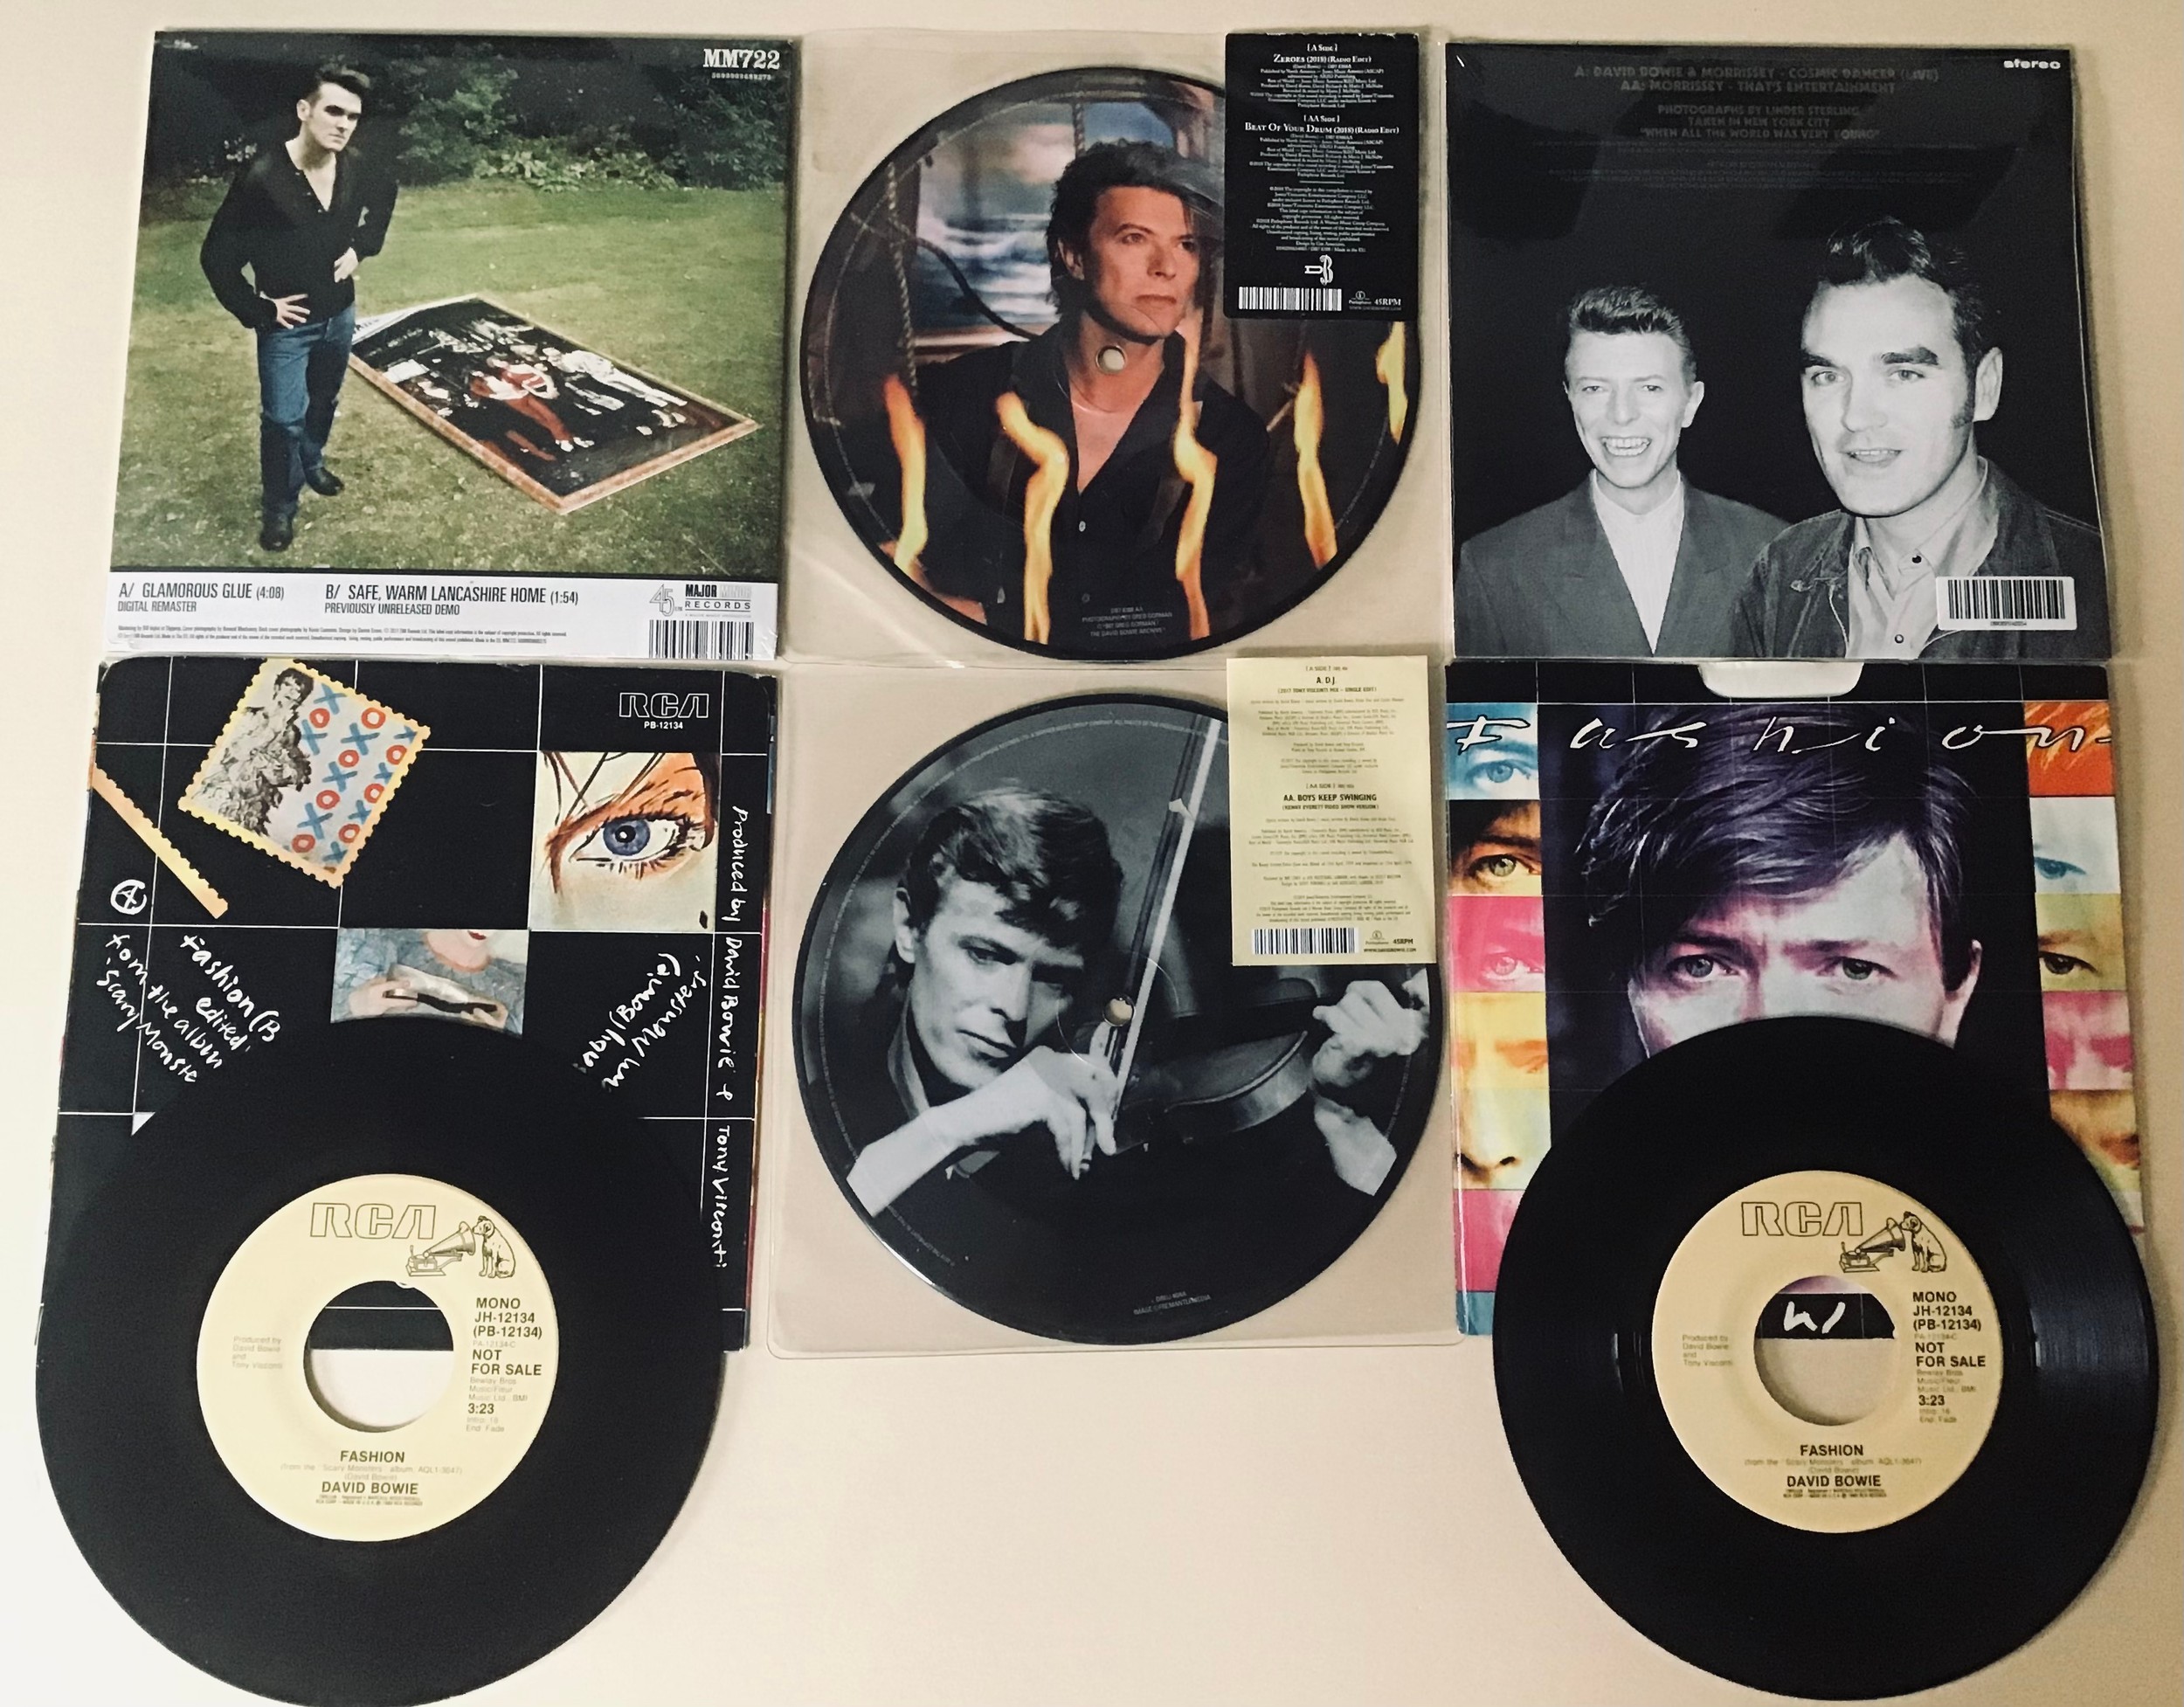 DAVID BOWIE AND MORRISSEY 7” SINGLES. First we have 2 sealed singles - Morrissey “Glamorous Glue” - Image 2 of 2